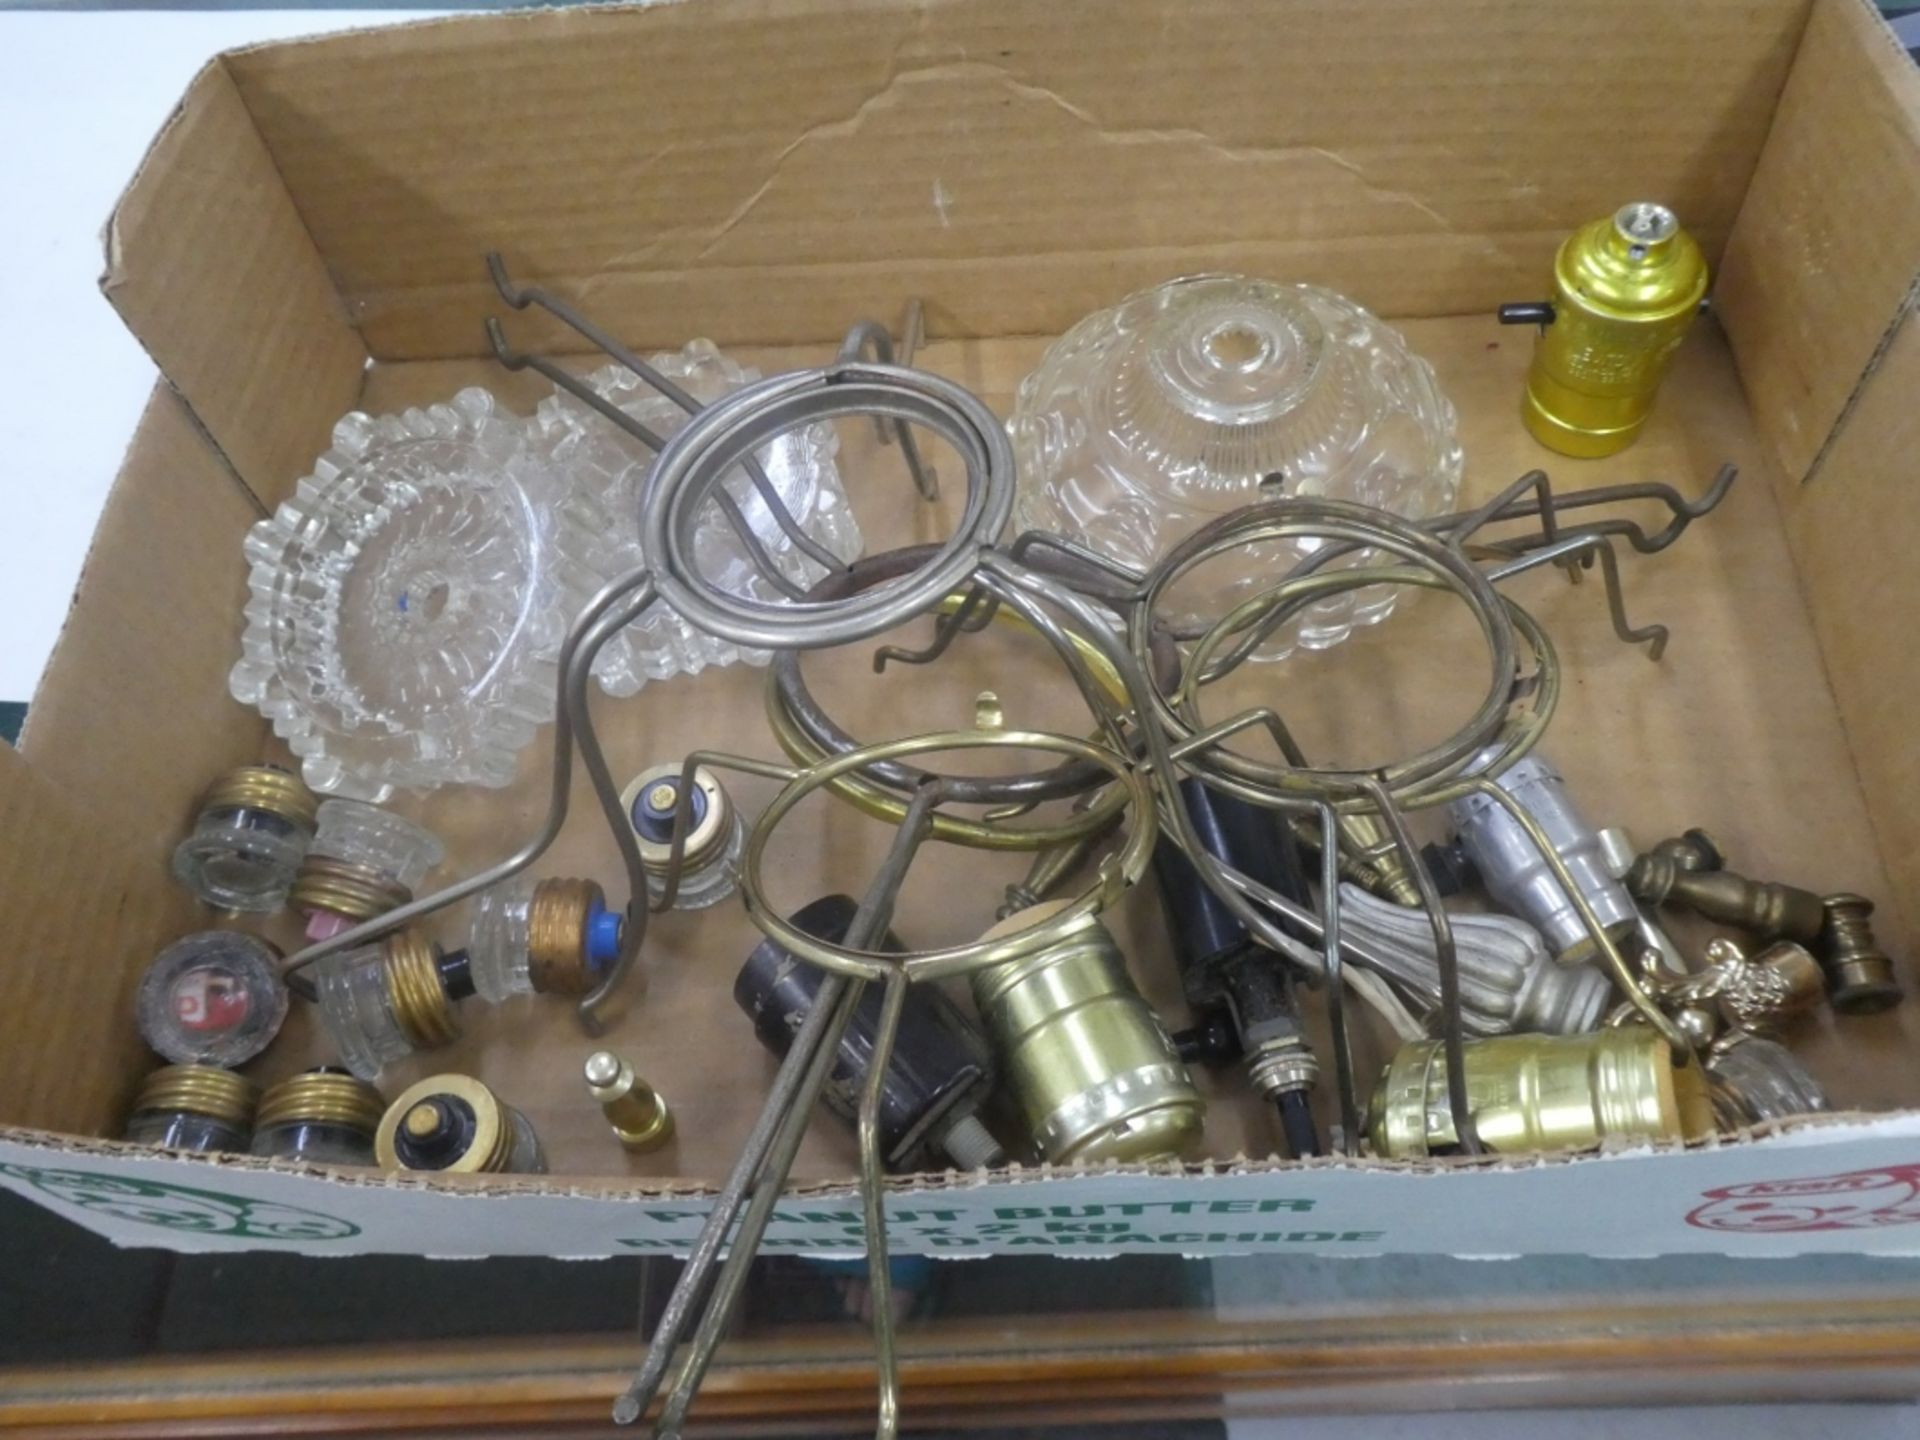 ELECTRIC LAMP PARTS, FINNIALS,FUSES ETC - Image 2 of 2